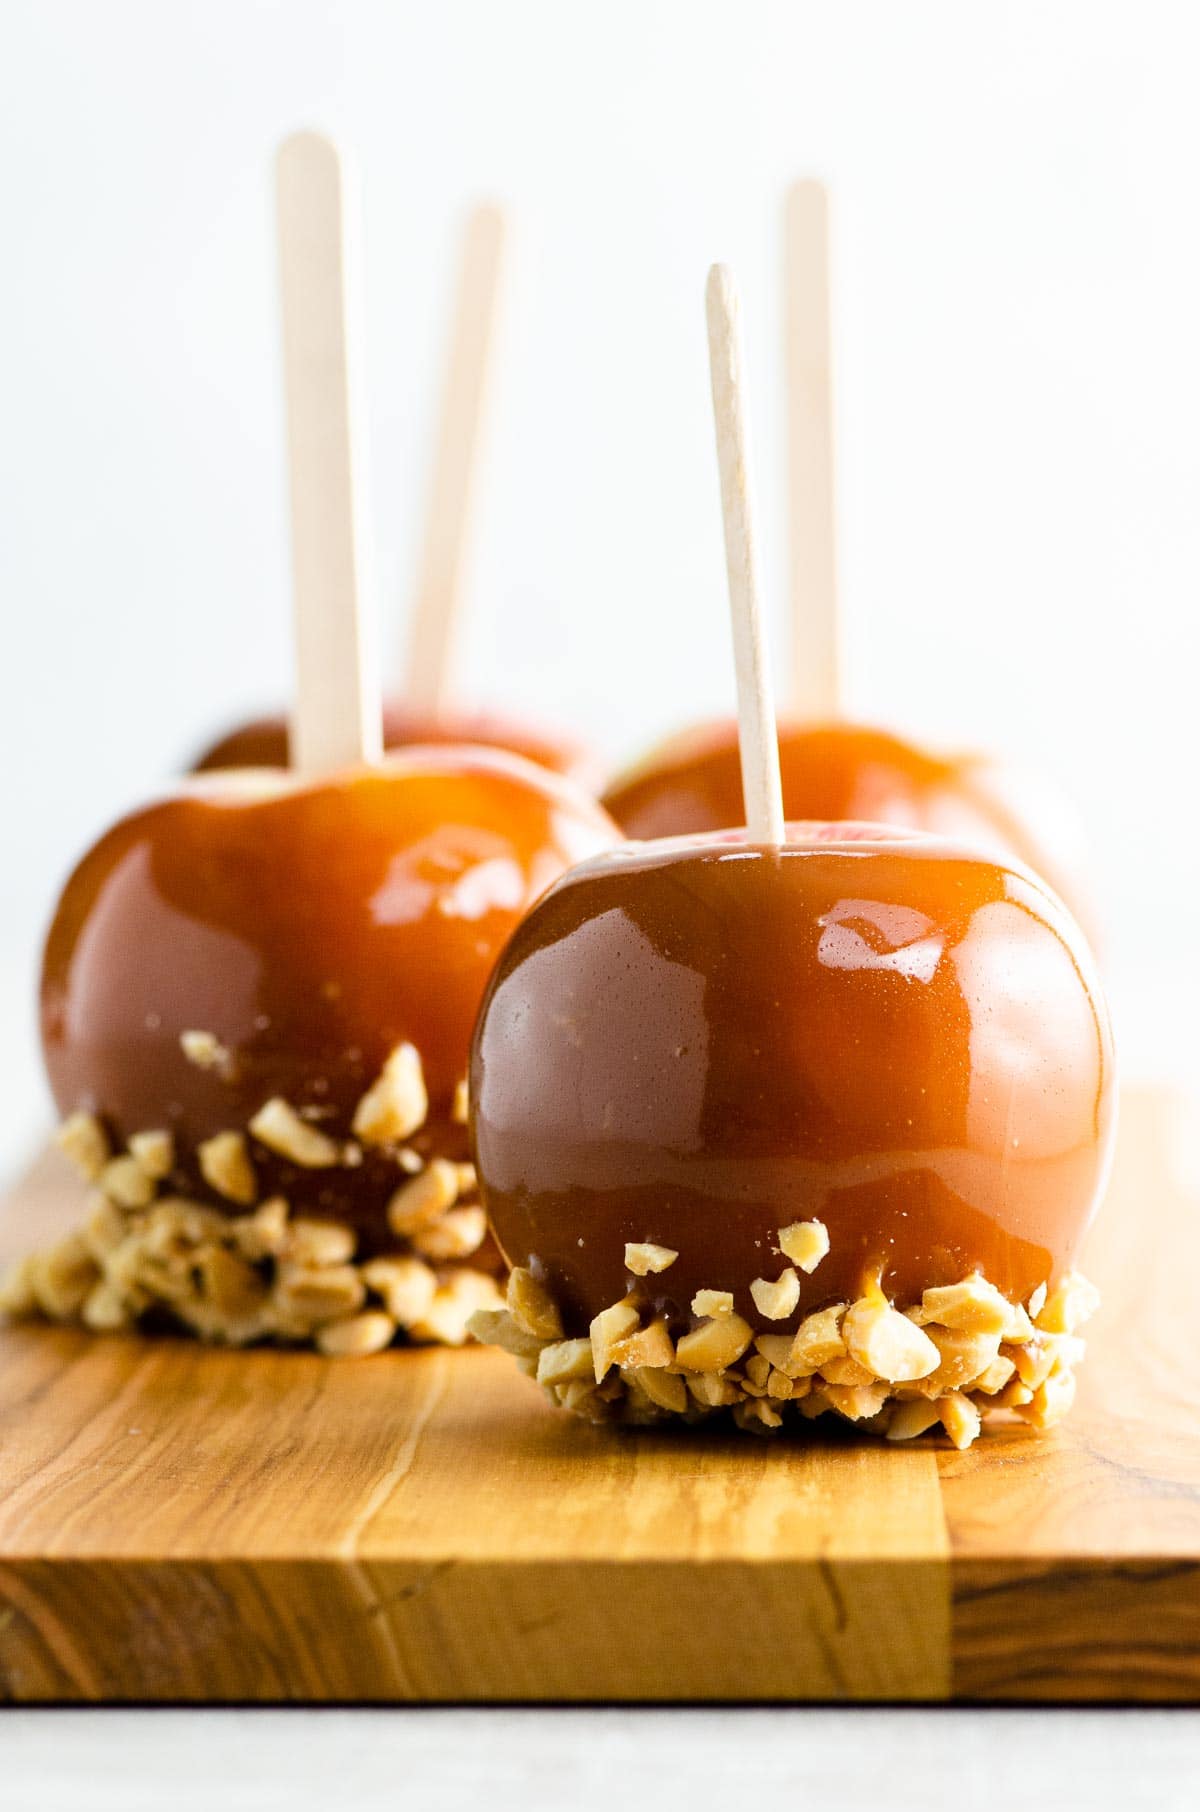 homemade caramel apples with peanuts on a wooden board